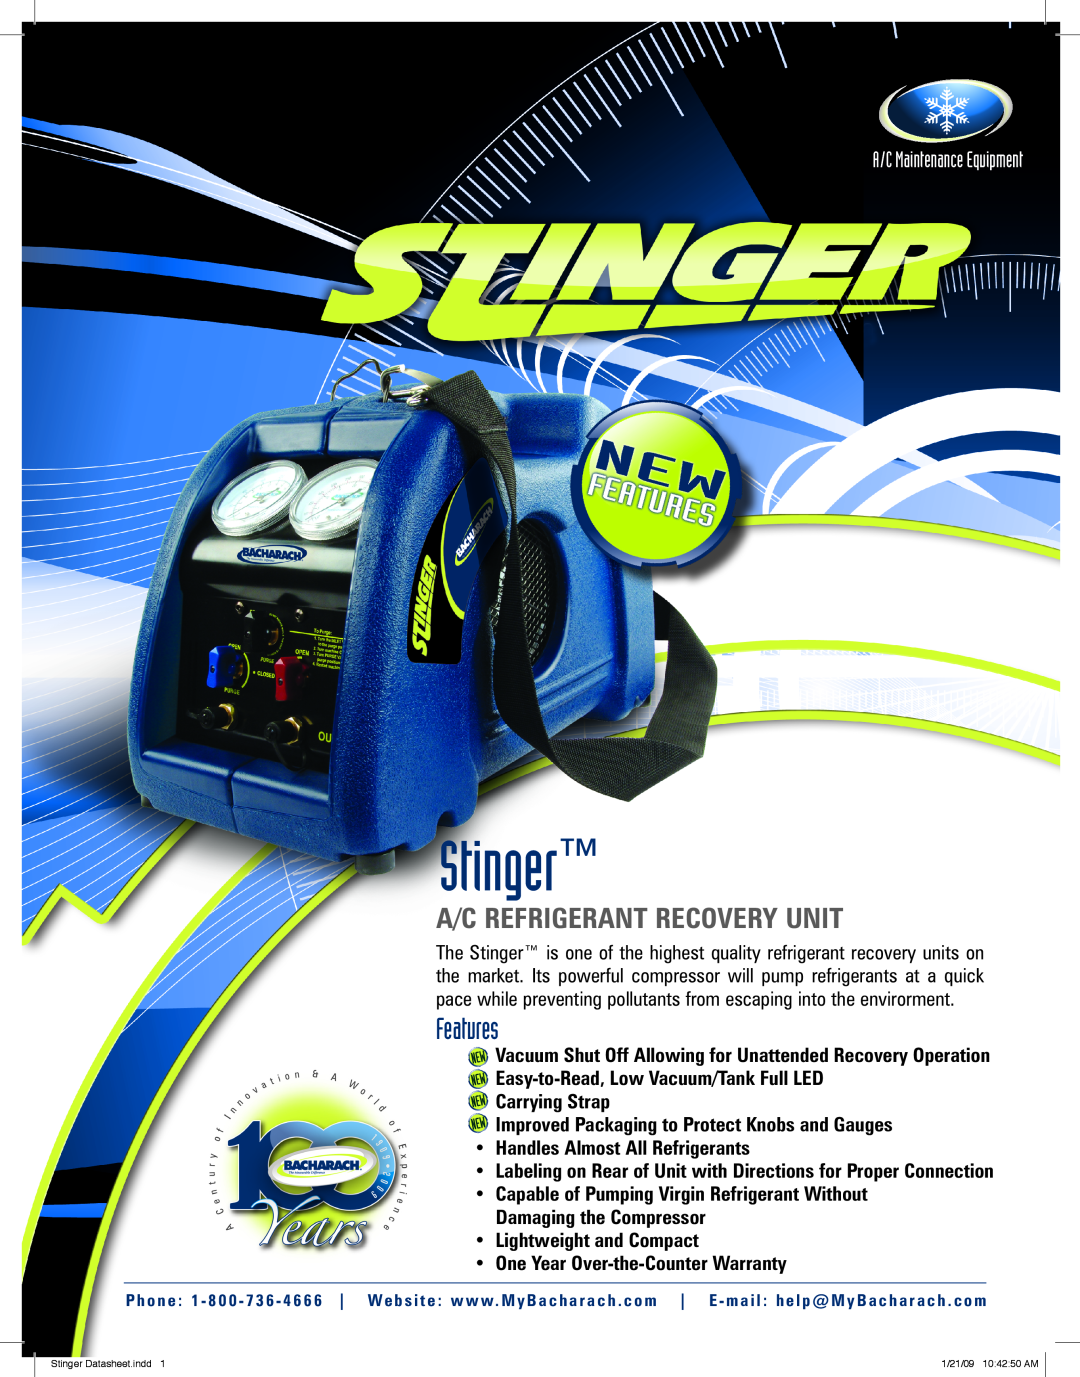 Bacharach Stinger warranty Features, A/C Refrigerant recovery unit, A/C Maintenance Equipment 